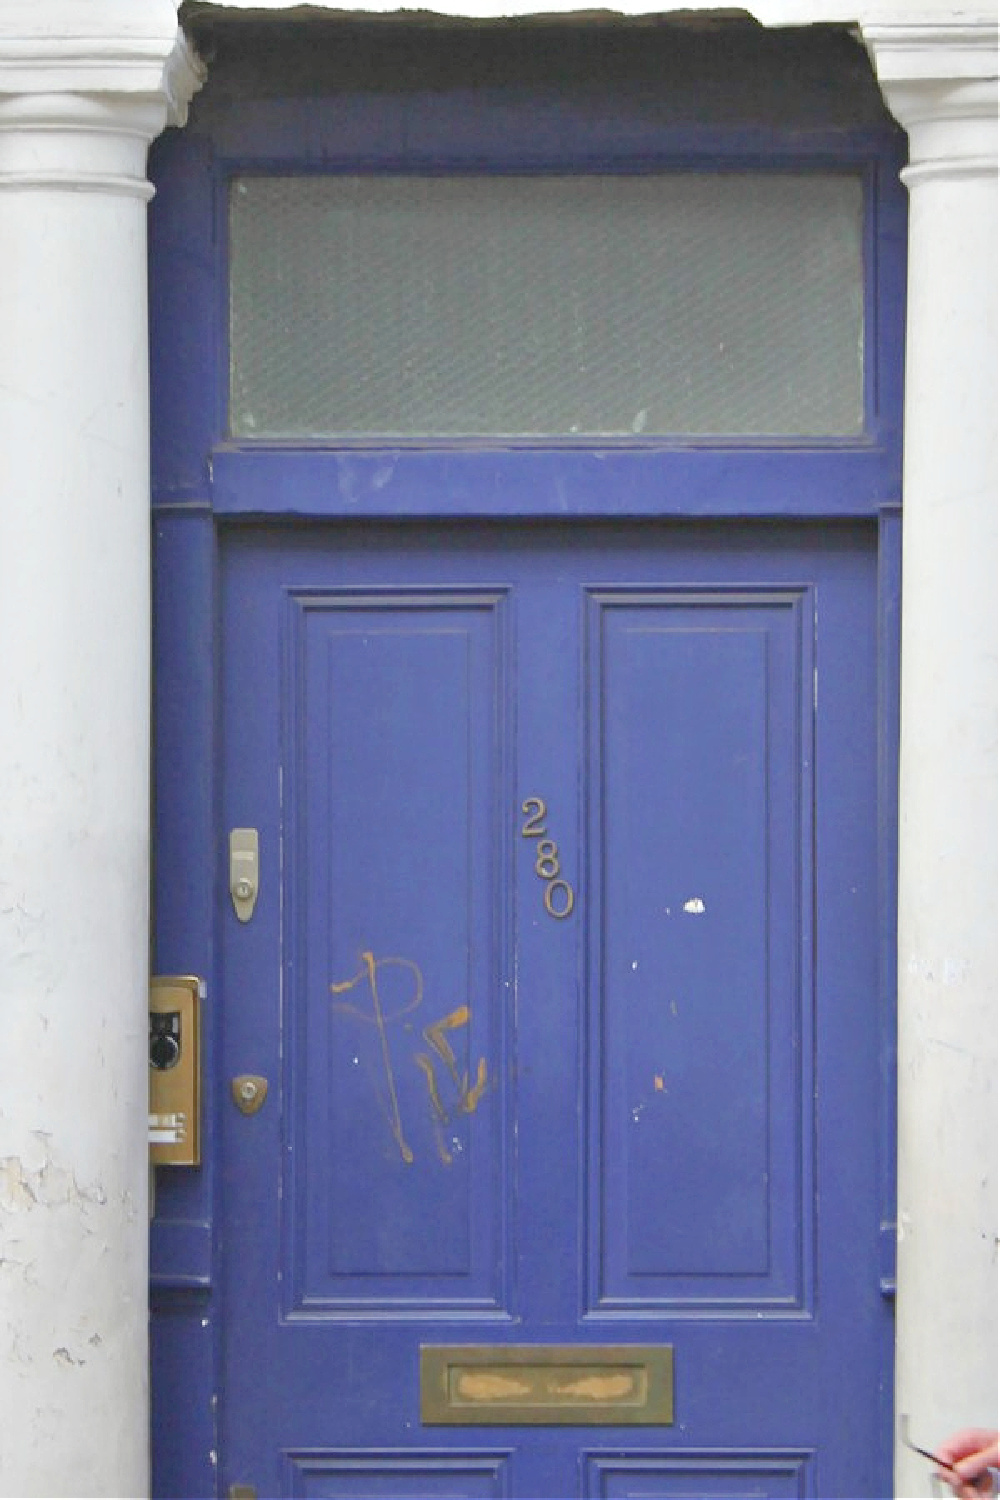 Bright blue door on row house in Notting Hill from the movie with Hugh Grant and Julia Roberts. #nottinghillmovie #nottinghillmoviehouse